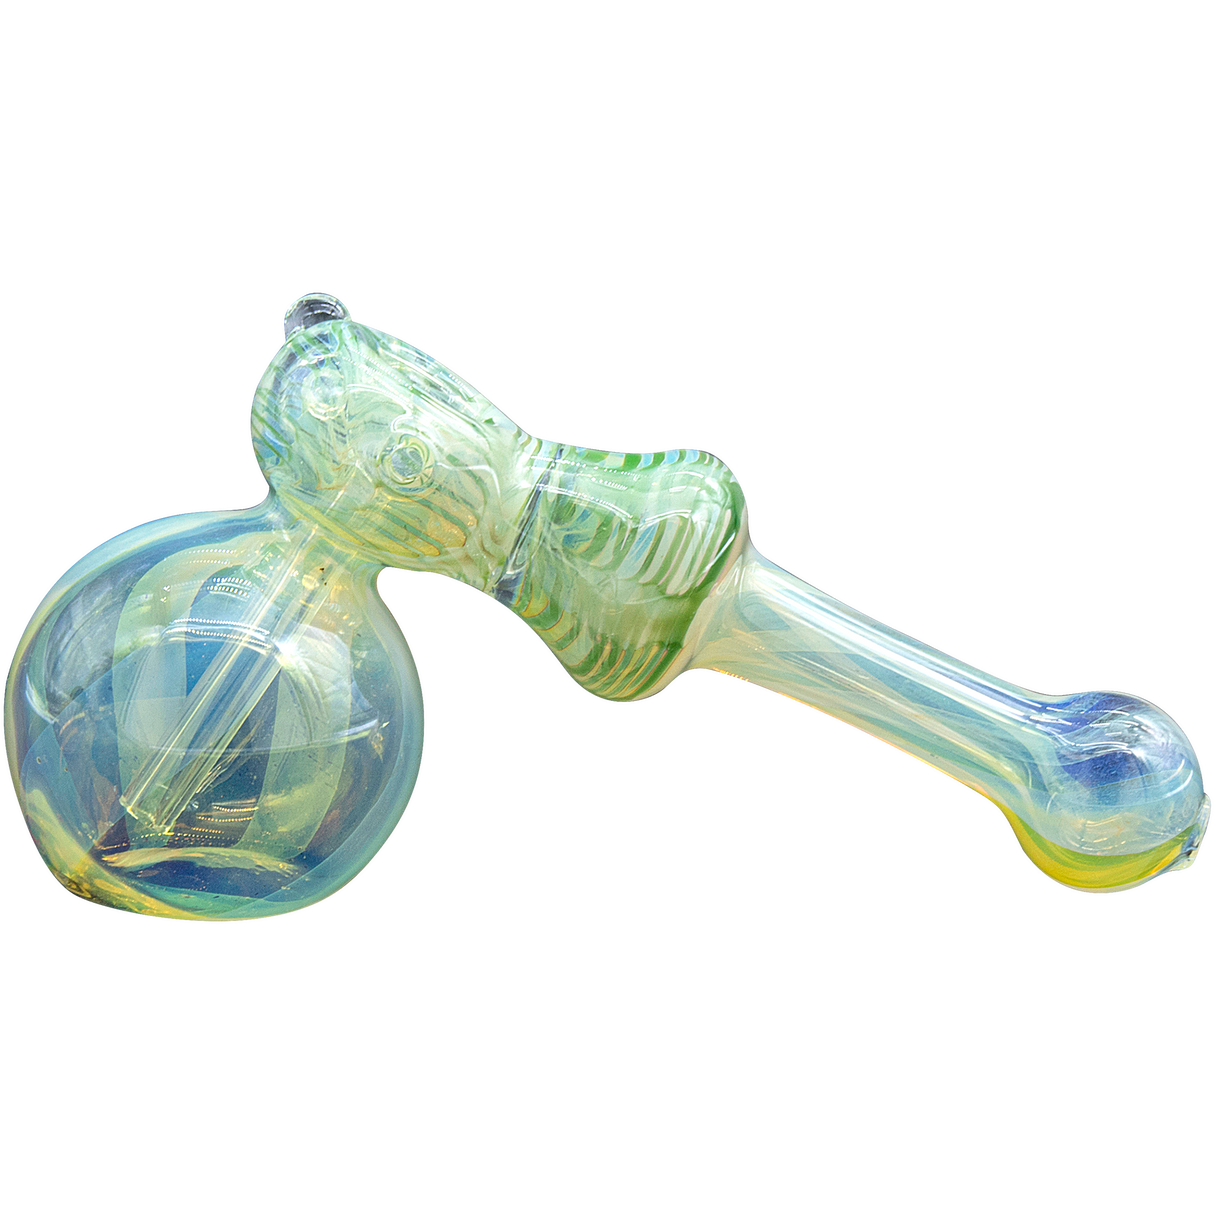 LA Pipes "Raked Hammer" Fumed Hammer Bubbler Pipe in Forest Green, 6" Borosilicate Glass, Side View